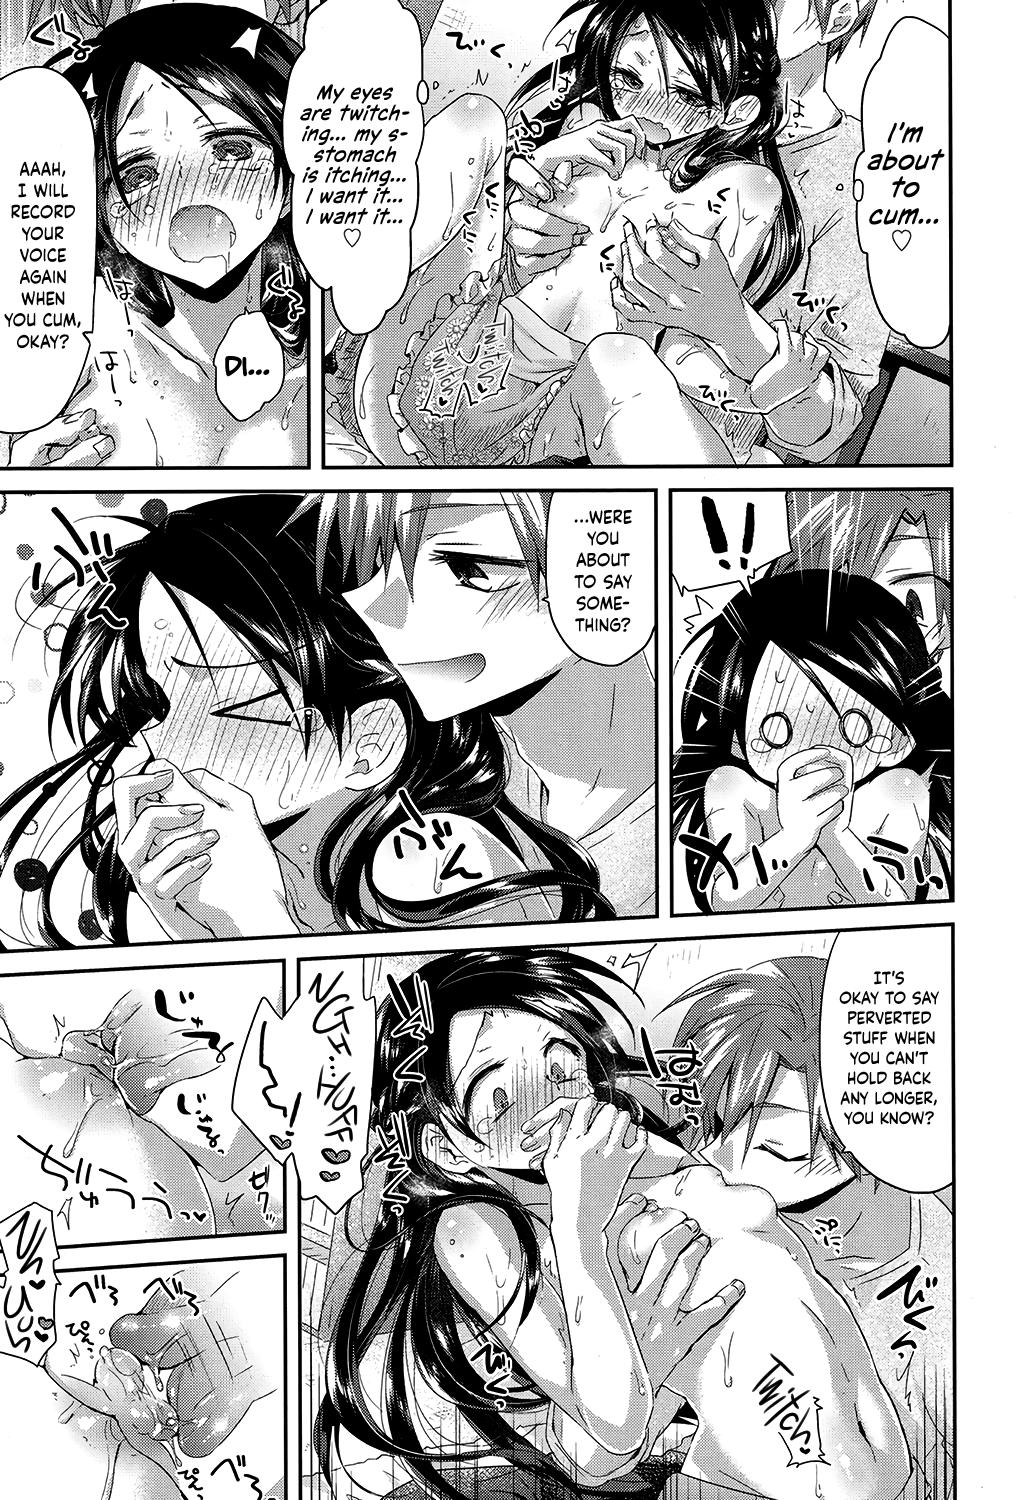 Mexican Don’t Say It⇔I Wanna Say It After All Blowjob Contest - Page 9